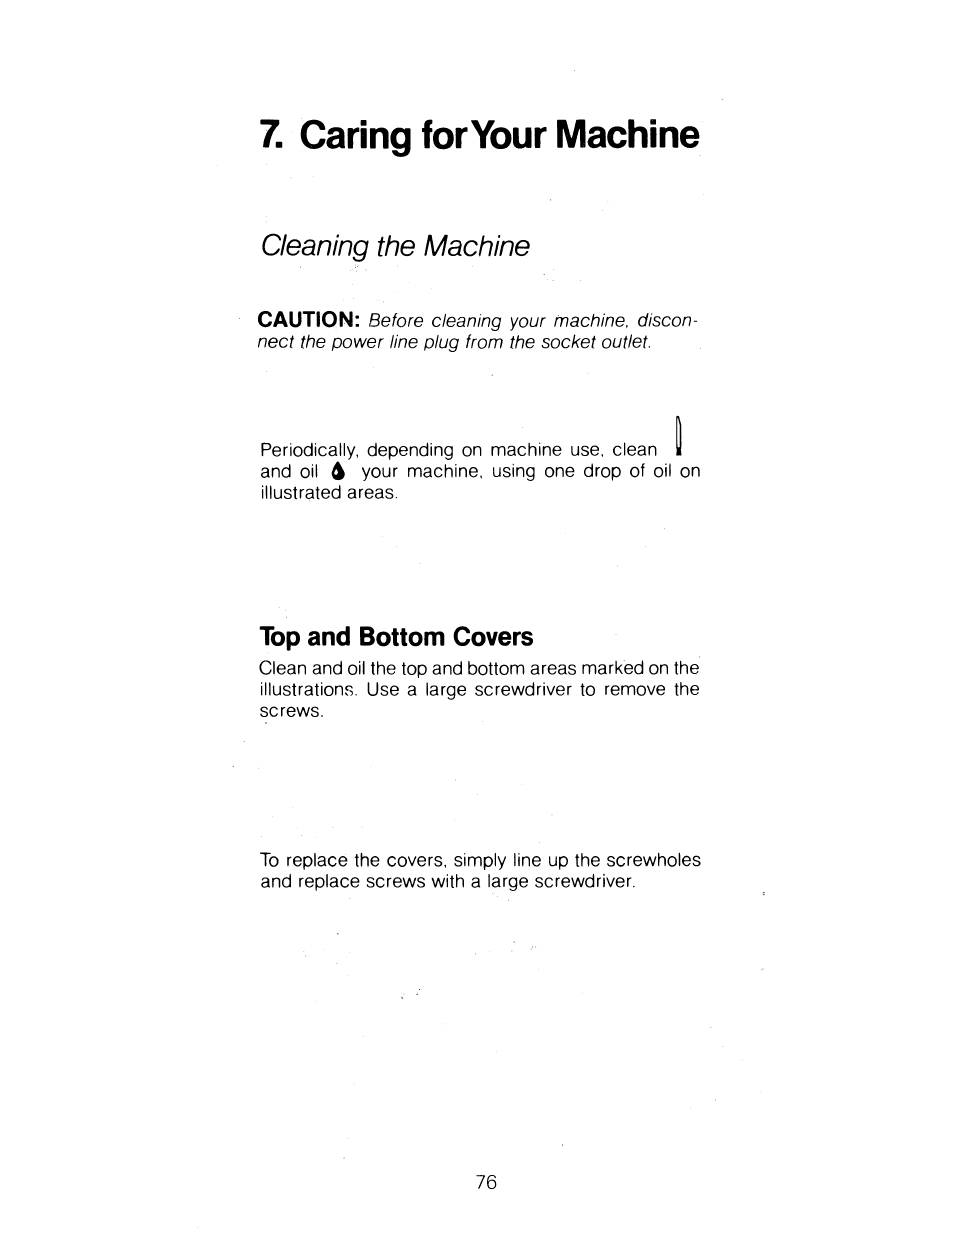 Caring for your machine, Cleaning the machine, Top and bottom covers | SINGER 1288 User Manual | Page 77 / 89